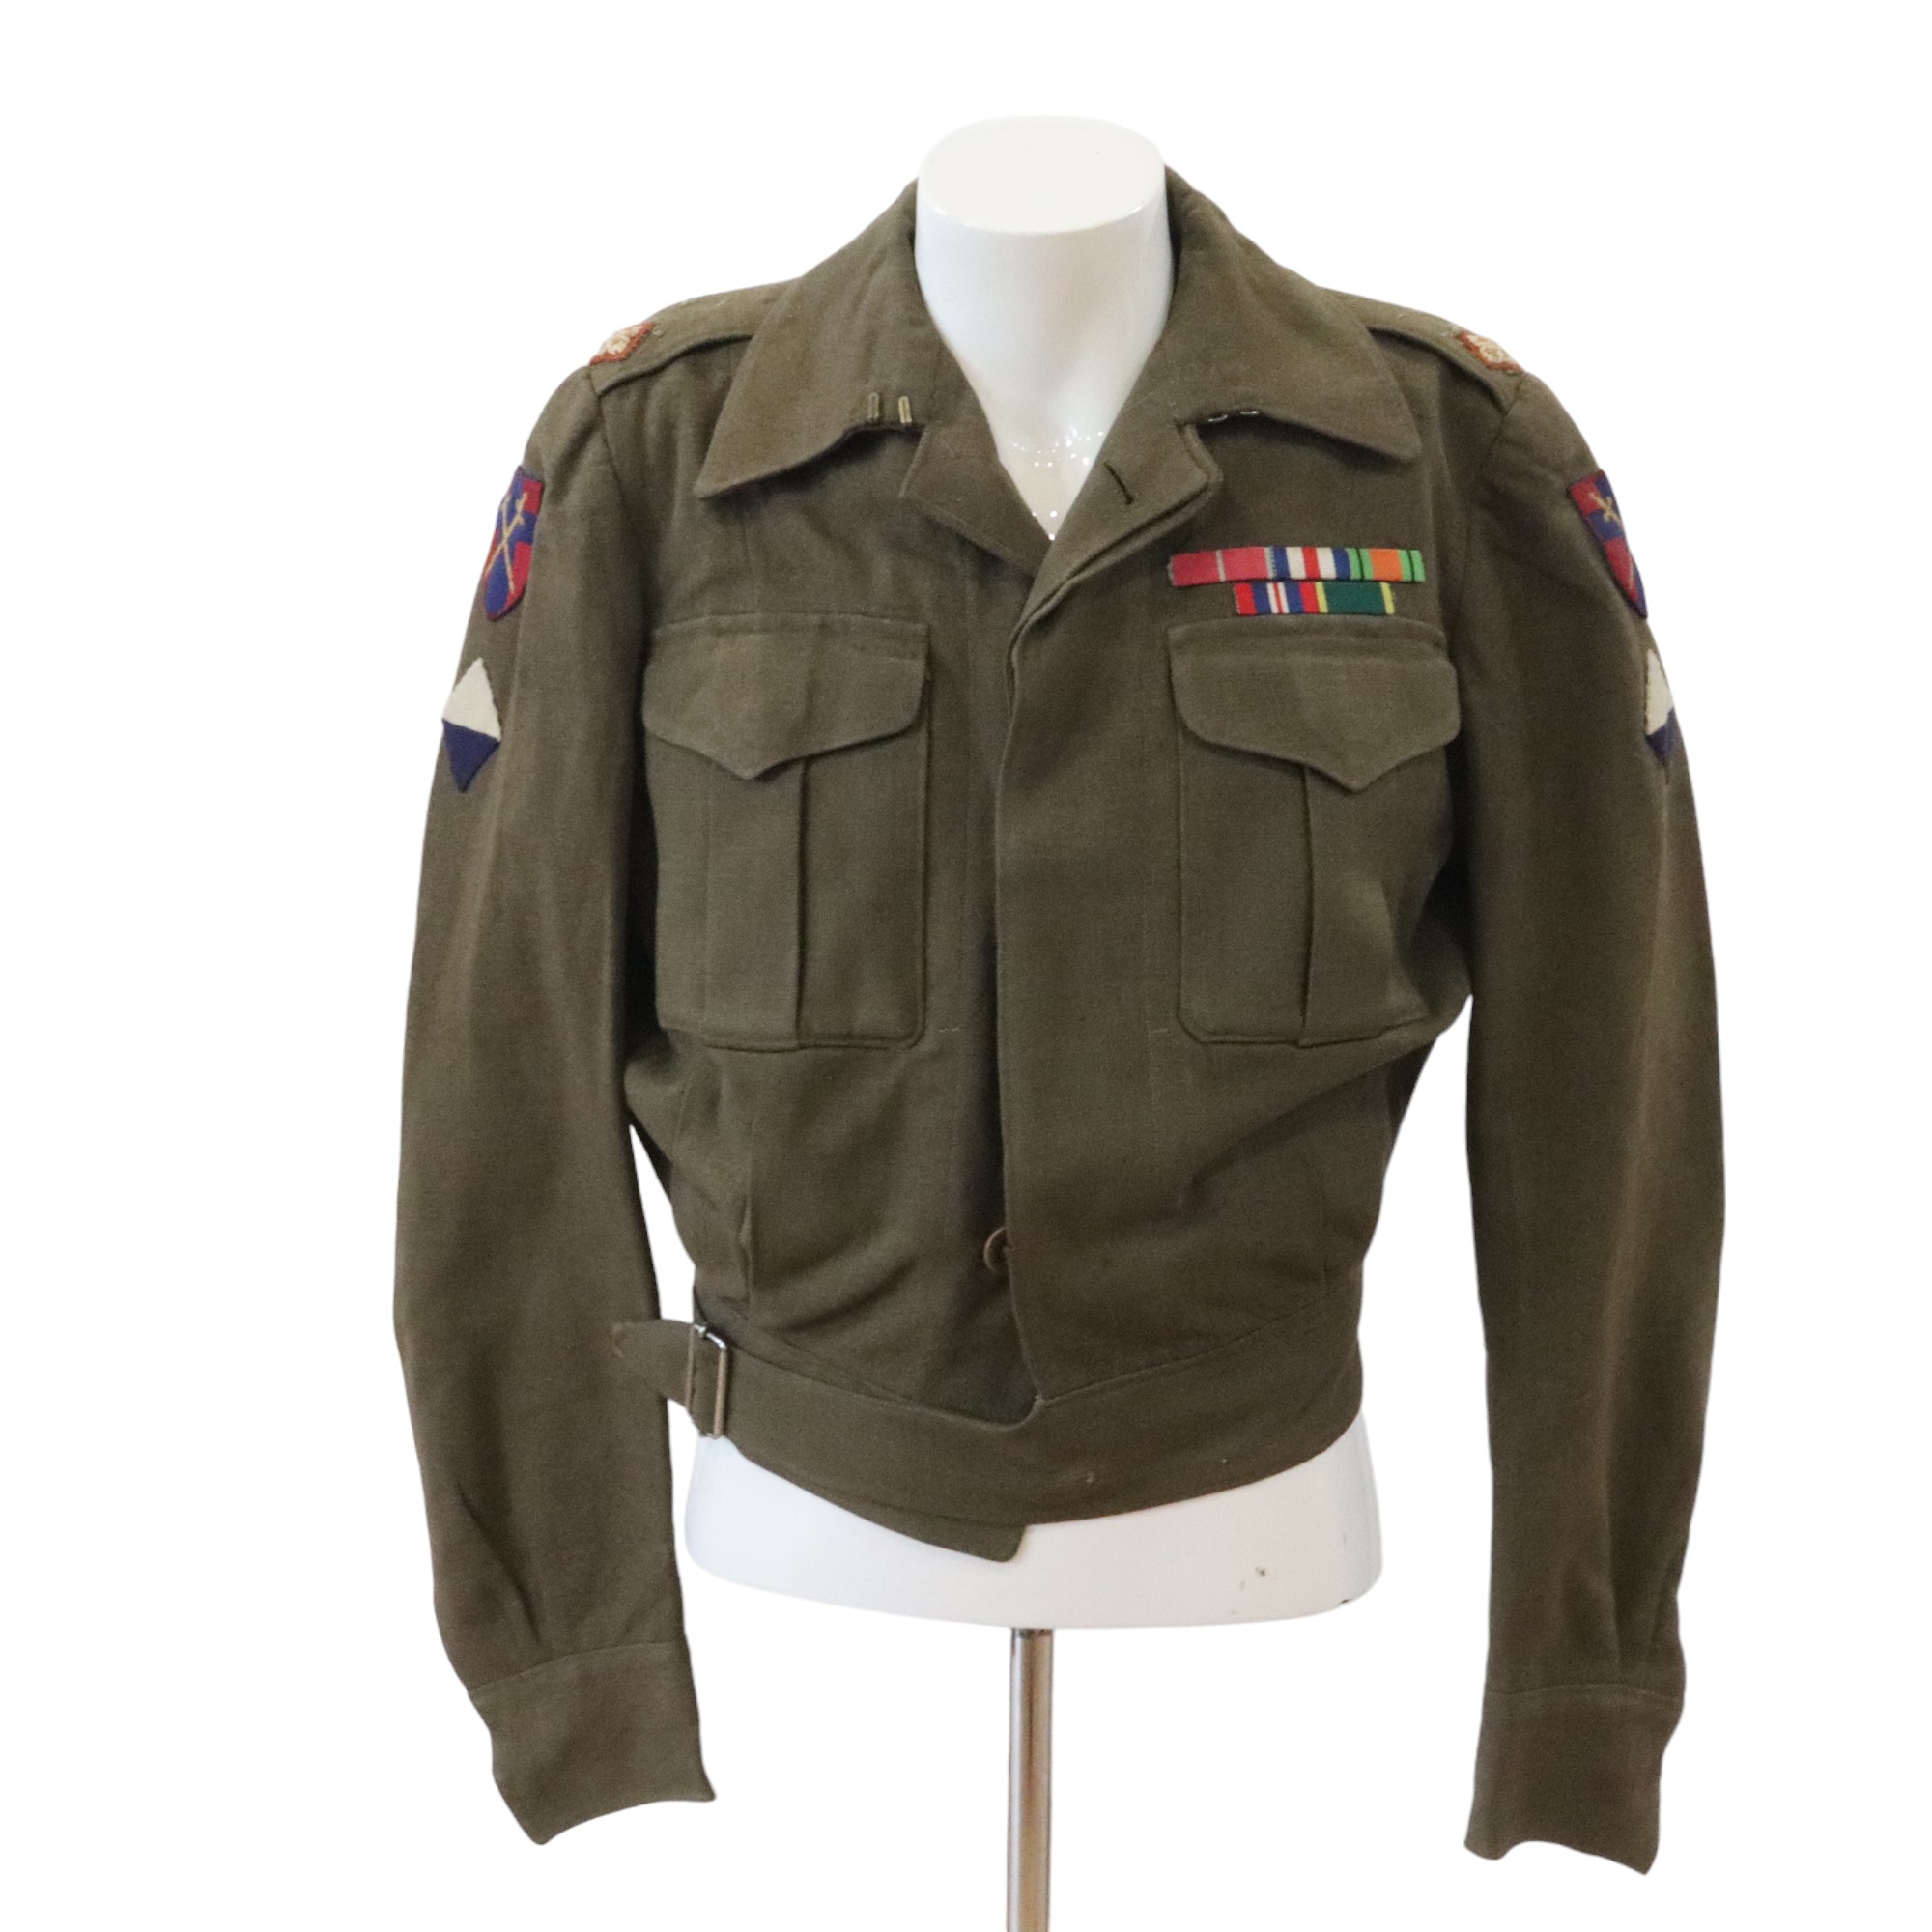 A private purchase Battledress Blouse bearing ATS, HQ 21st Army Group insignia